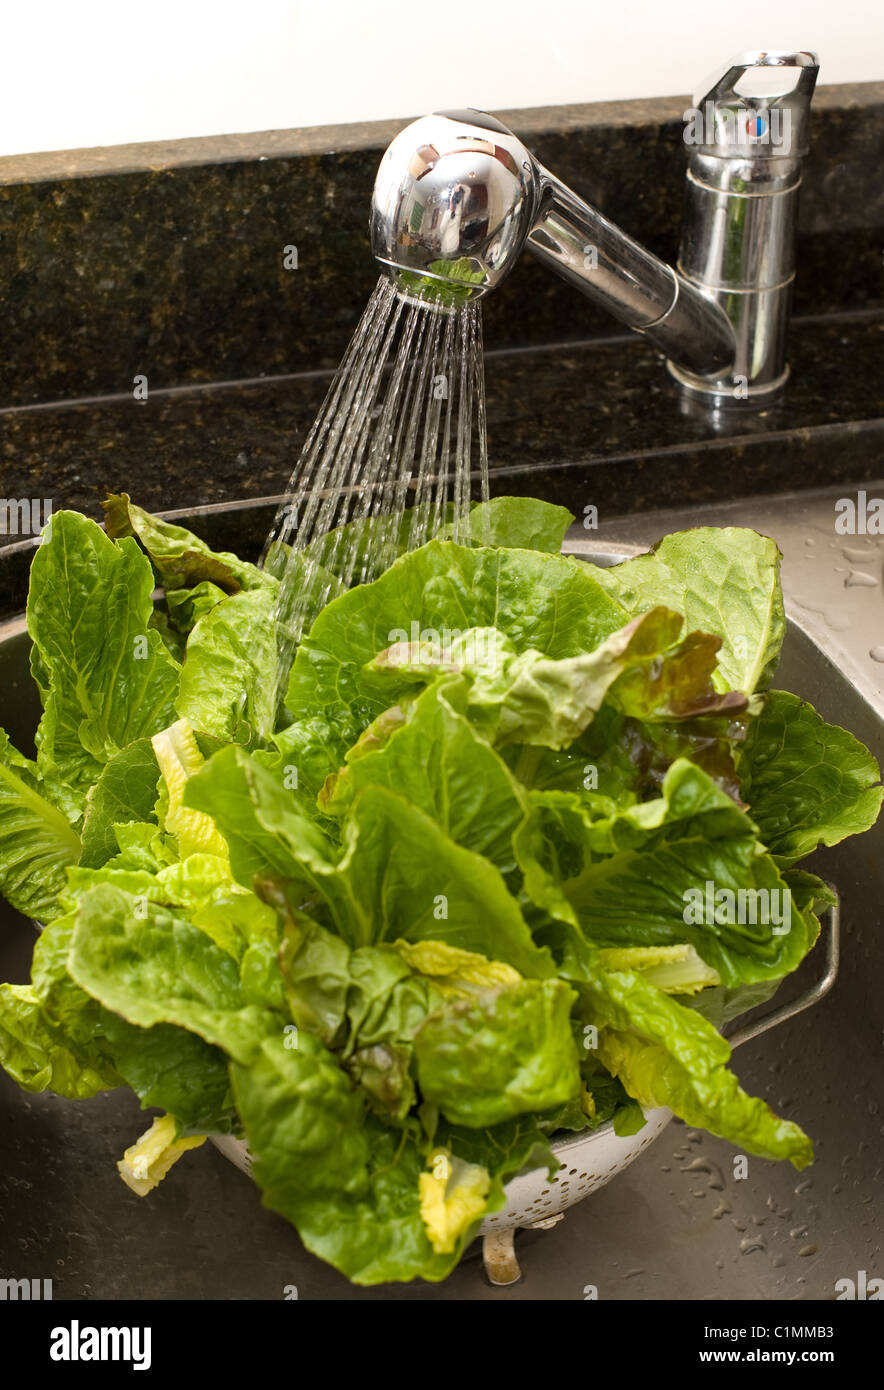 Washing lettuce to remove dirt and bacteria Stock Photo